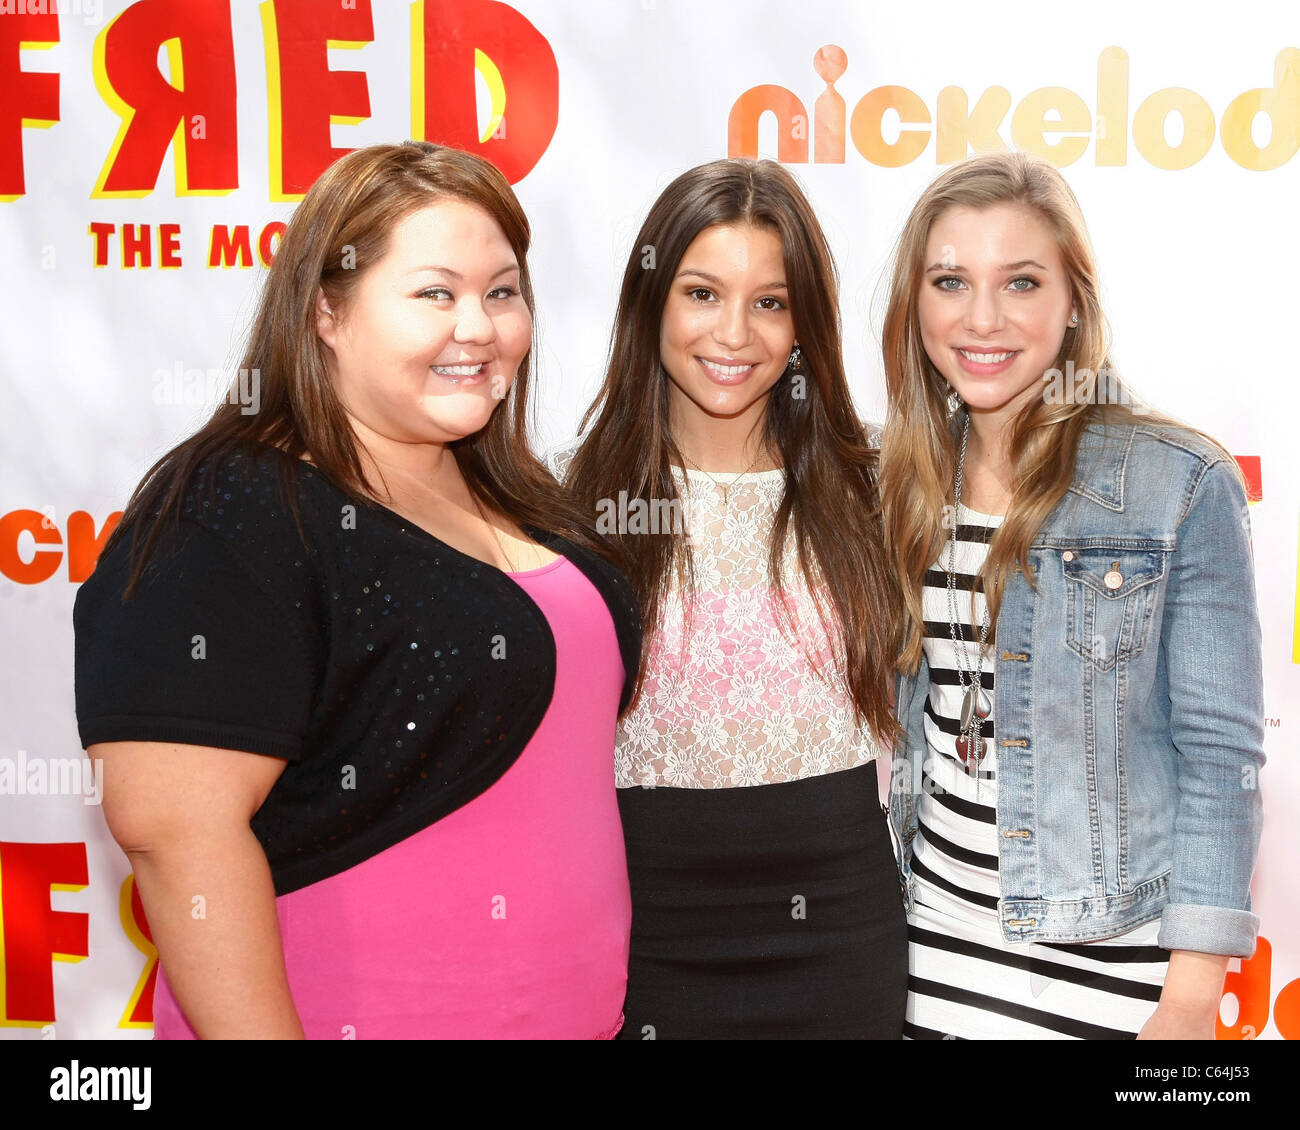 Jolene Purdy,Bianca Collins,Skyler Day at arrivals for FRED: THE MOVIE Premiere, Paramount Theatre, Los Angeles, CA September 11, 2010. Photo By: Craig Bennett/Everett Collection Stock Photo